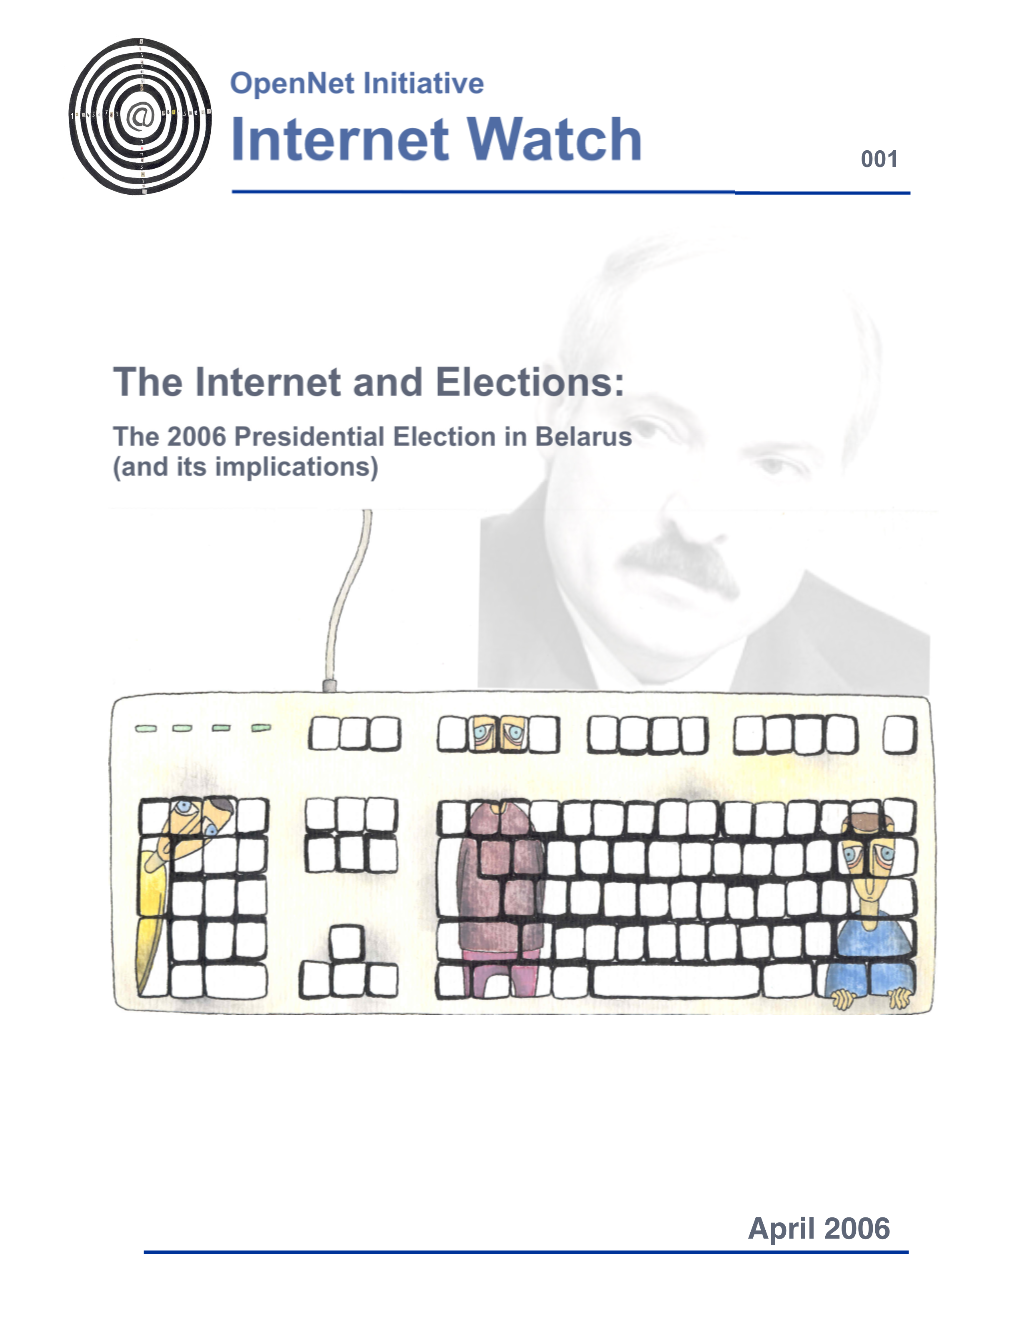 The Internet and Elections: the 2006 Presidential